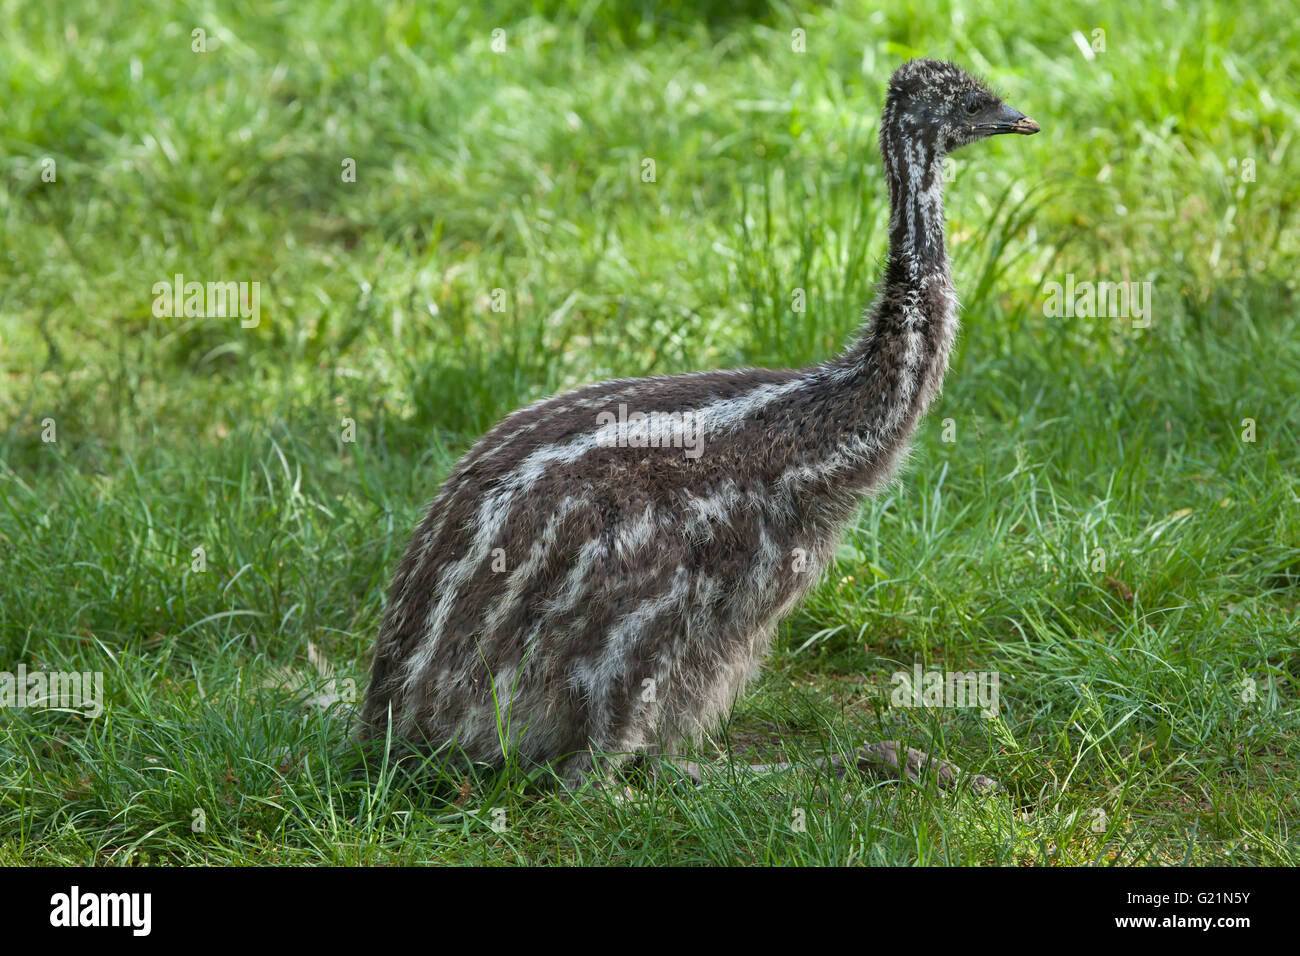 Two-month-old emu (Dromaius novaehollandiae) at Prague Zoo, Czech Republic. The chick hatched at the turn of February and March Stock Photo